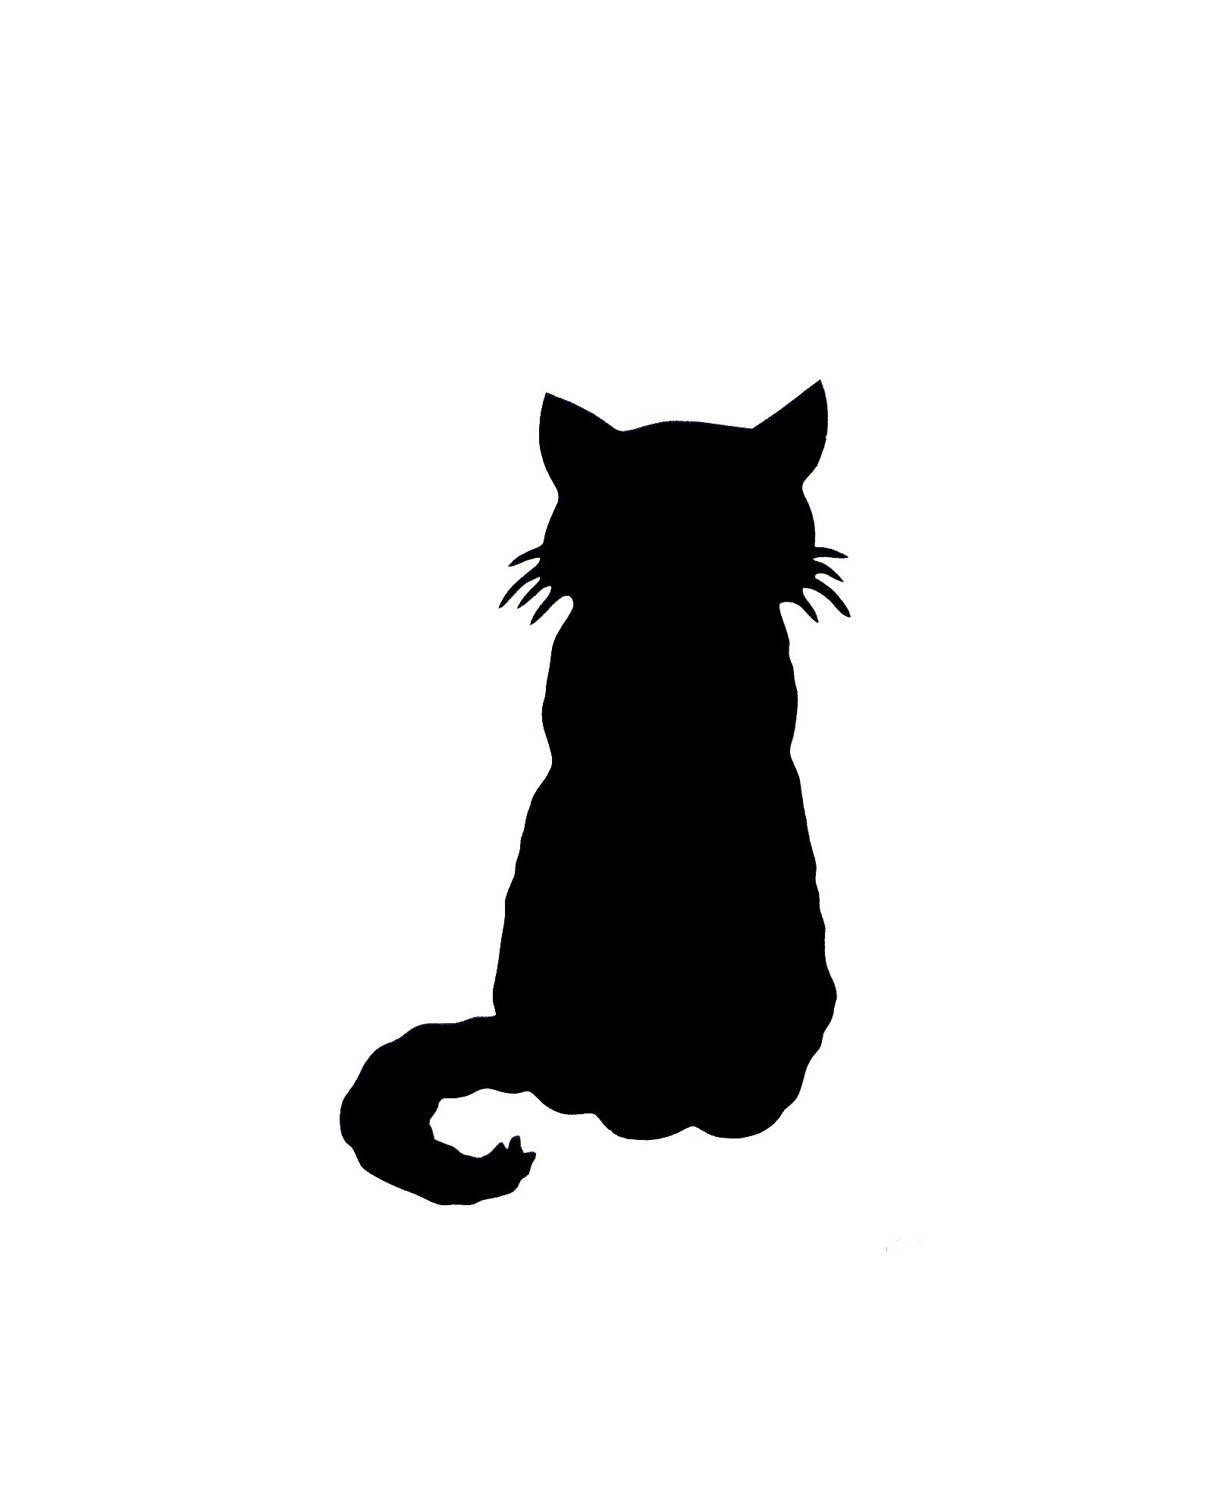 Sitting Cat Silhouette Images & Pictures - Becuo